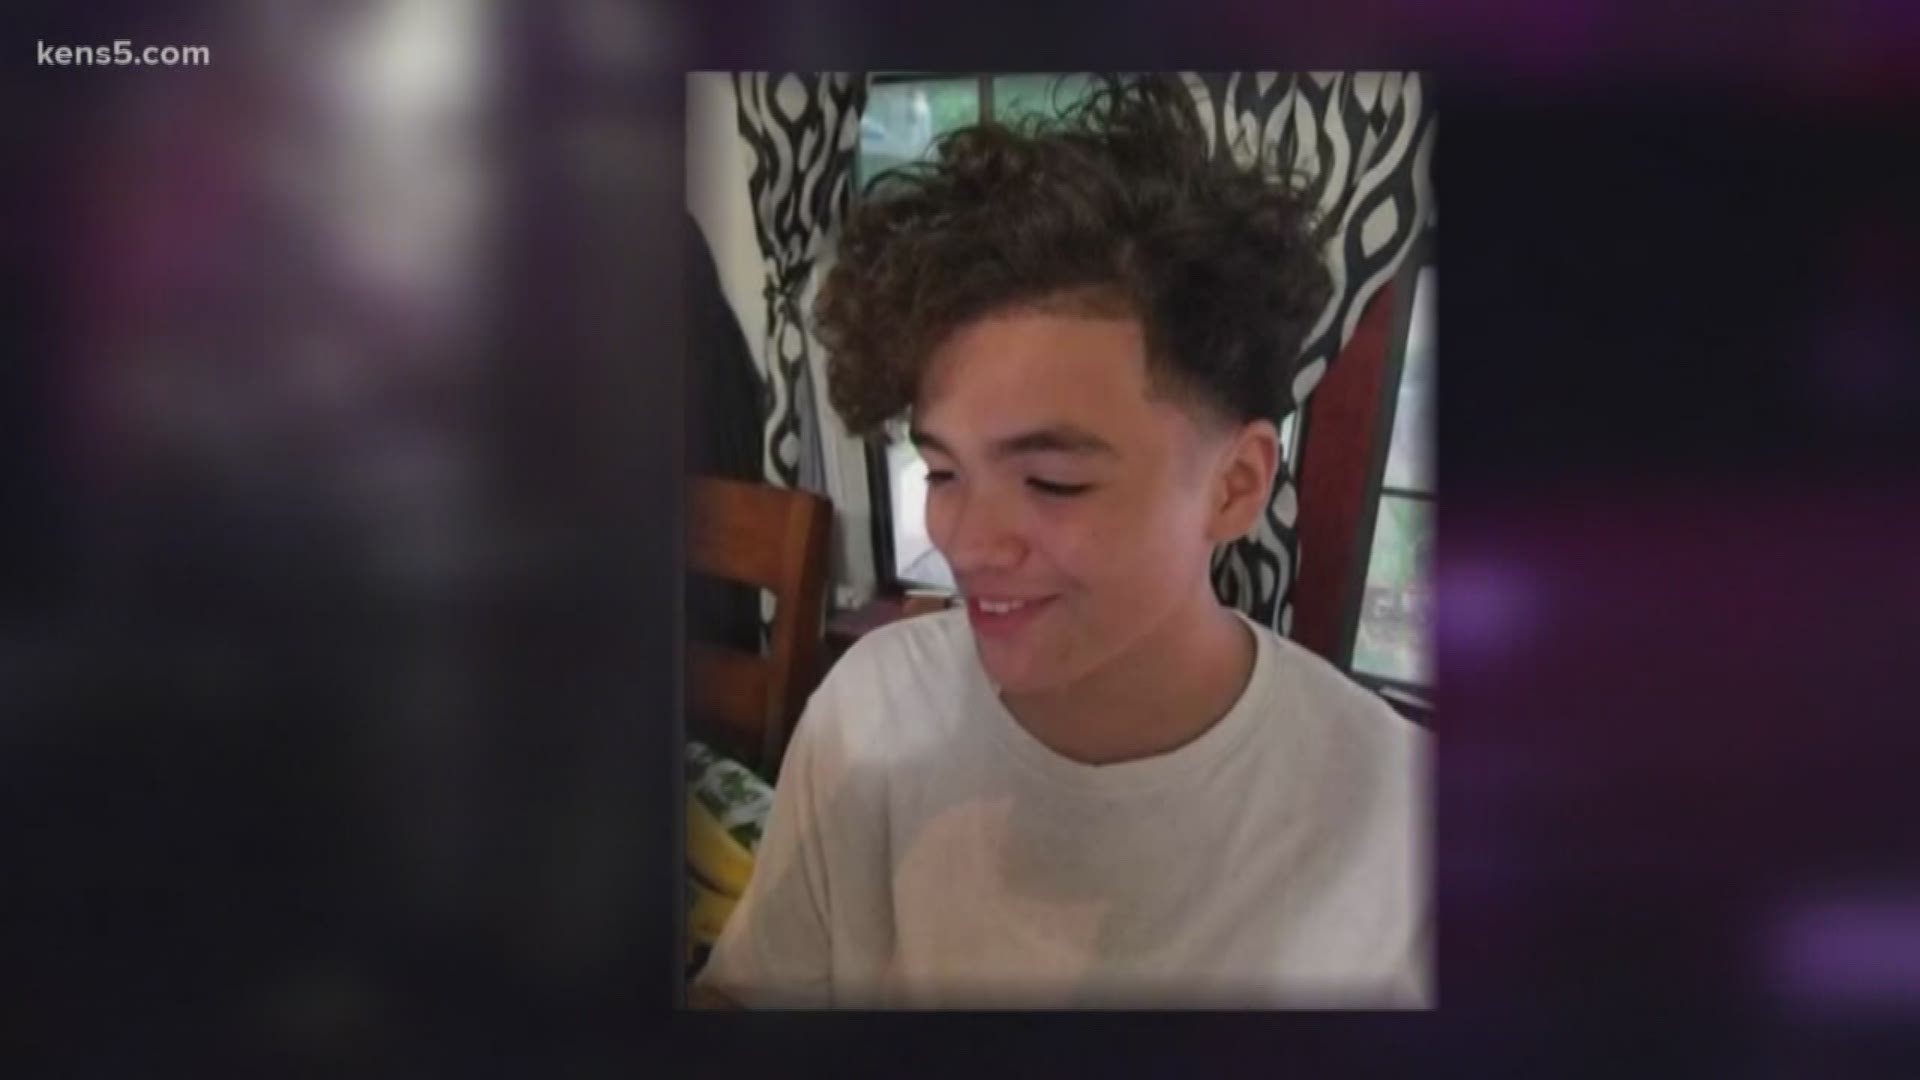 19-year-old Alonzo Cantu was taken into custody today. The victim's mother tells us she was left in tears when she heard Cantu was caught. Eyewitness News reporter Henry Ramos is live.